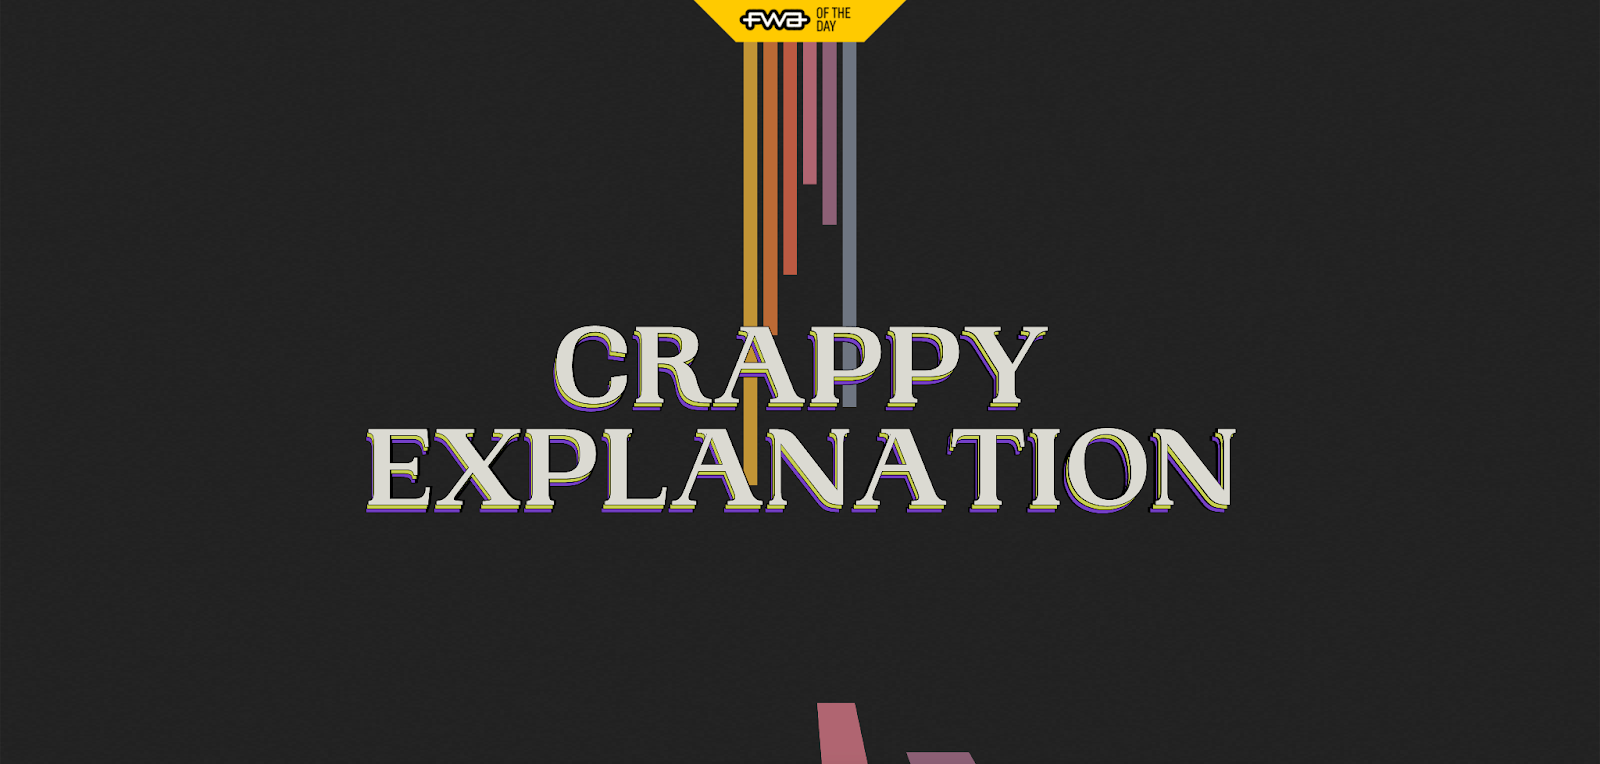 Get your retro inspiration fix at Crappy Explanation’s website, with 1980s vinyl record vibes